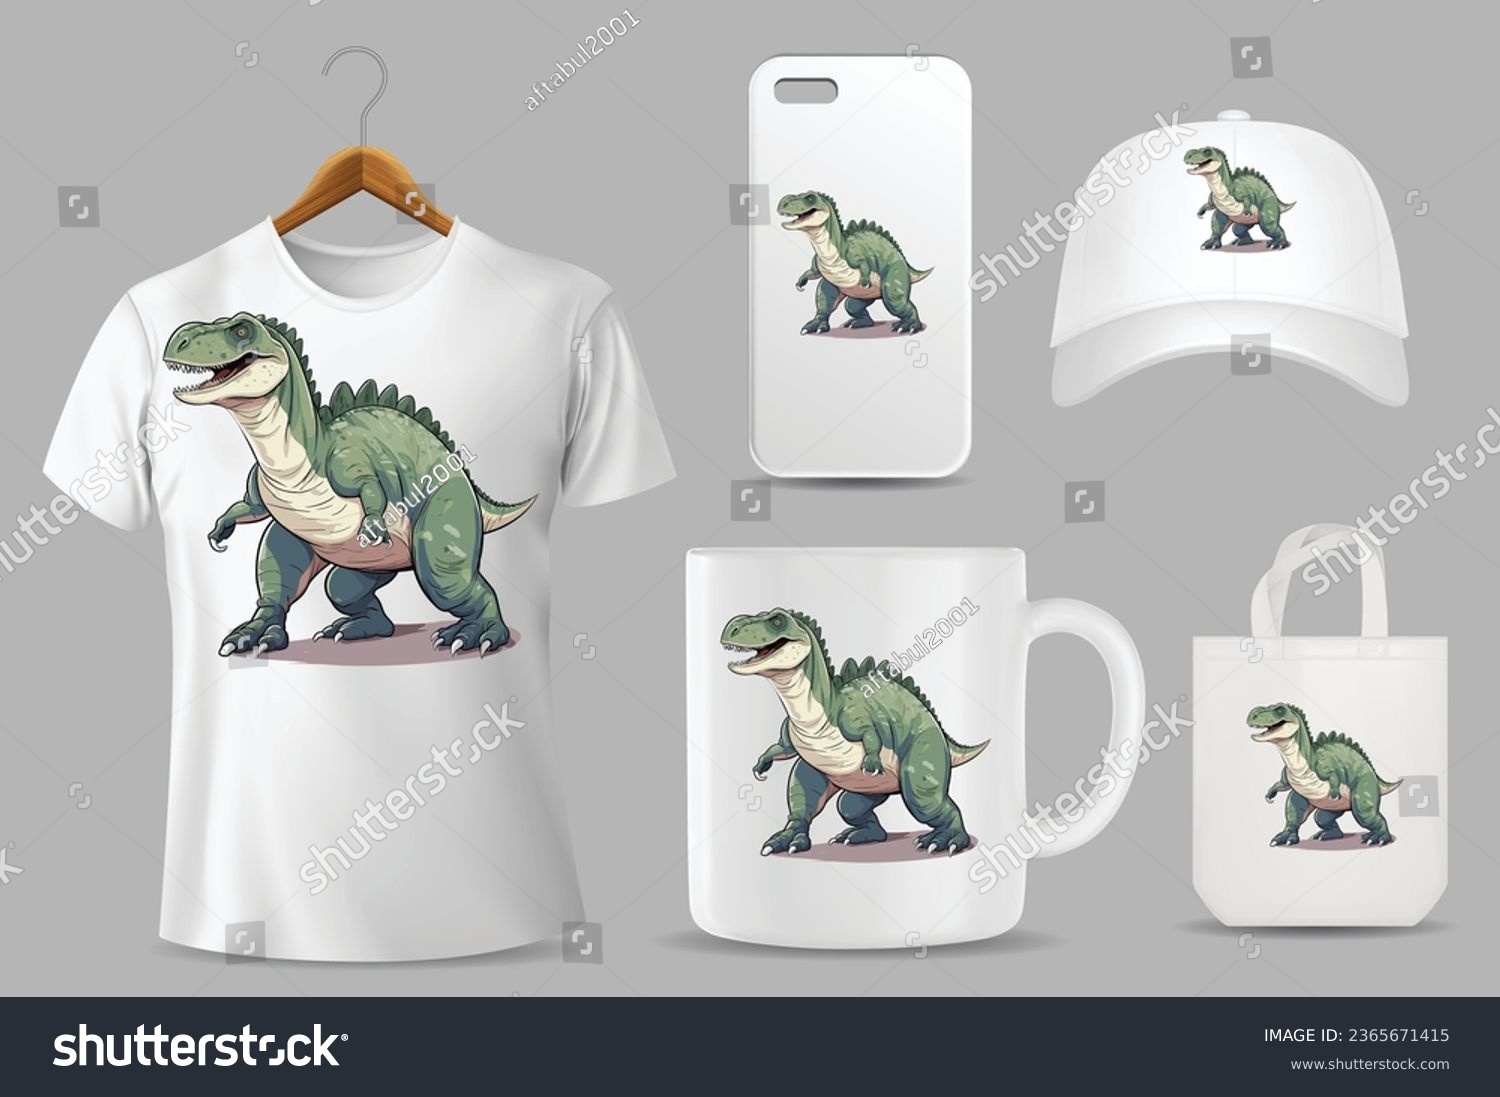 SVG of Hand Drawn Solid Color Dinosaur Illustration On Different Product Templates svg